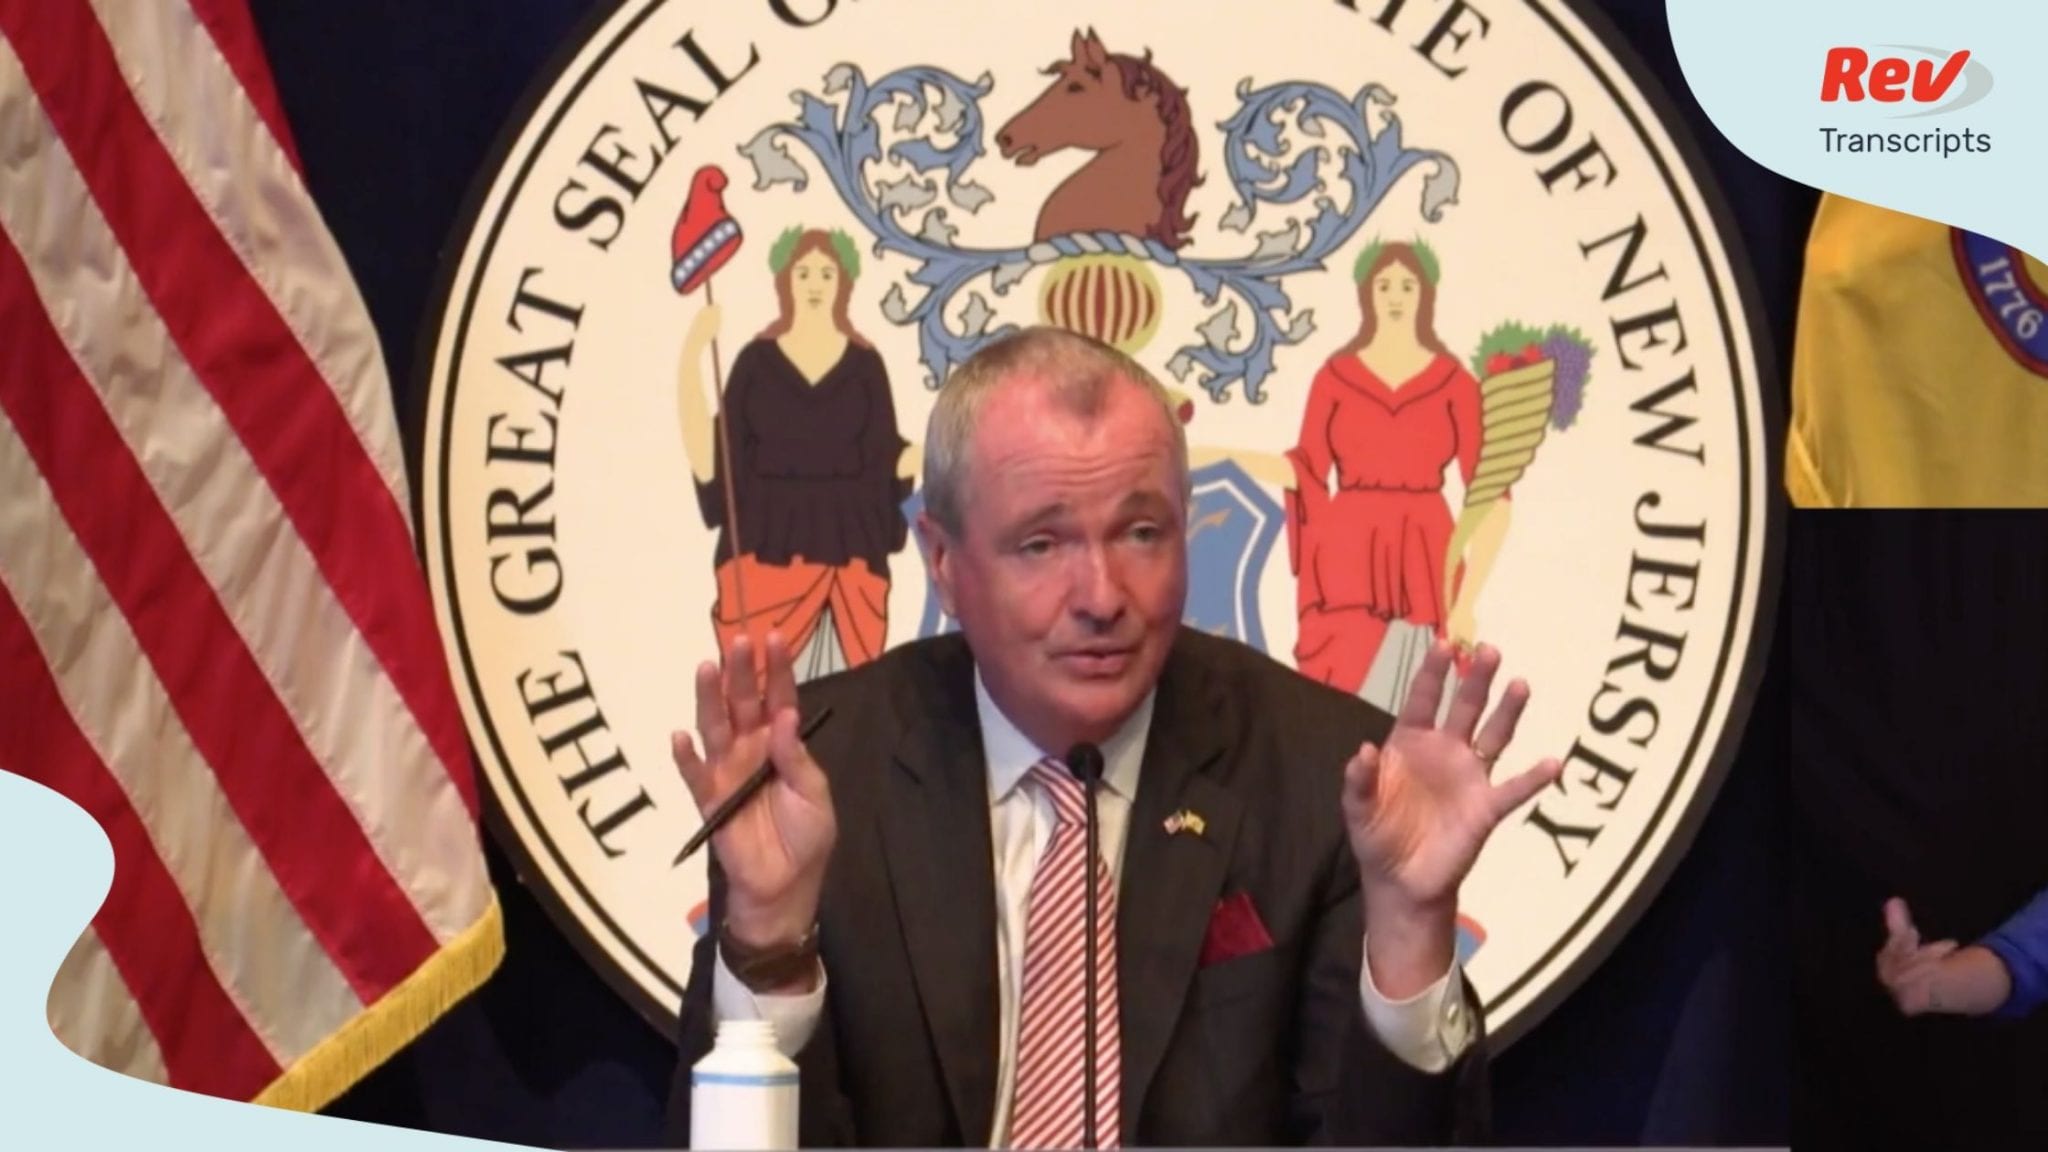 NJ Governor Murphy gave a press conference about COVID-19 on July 13